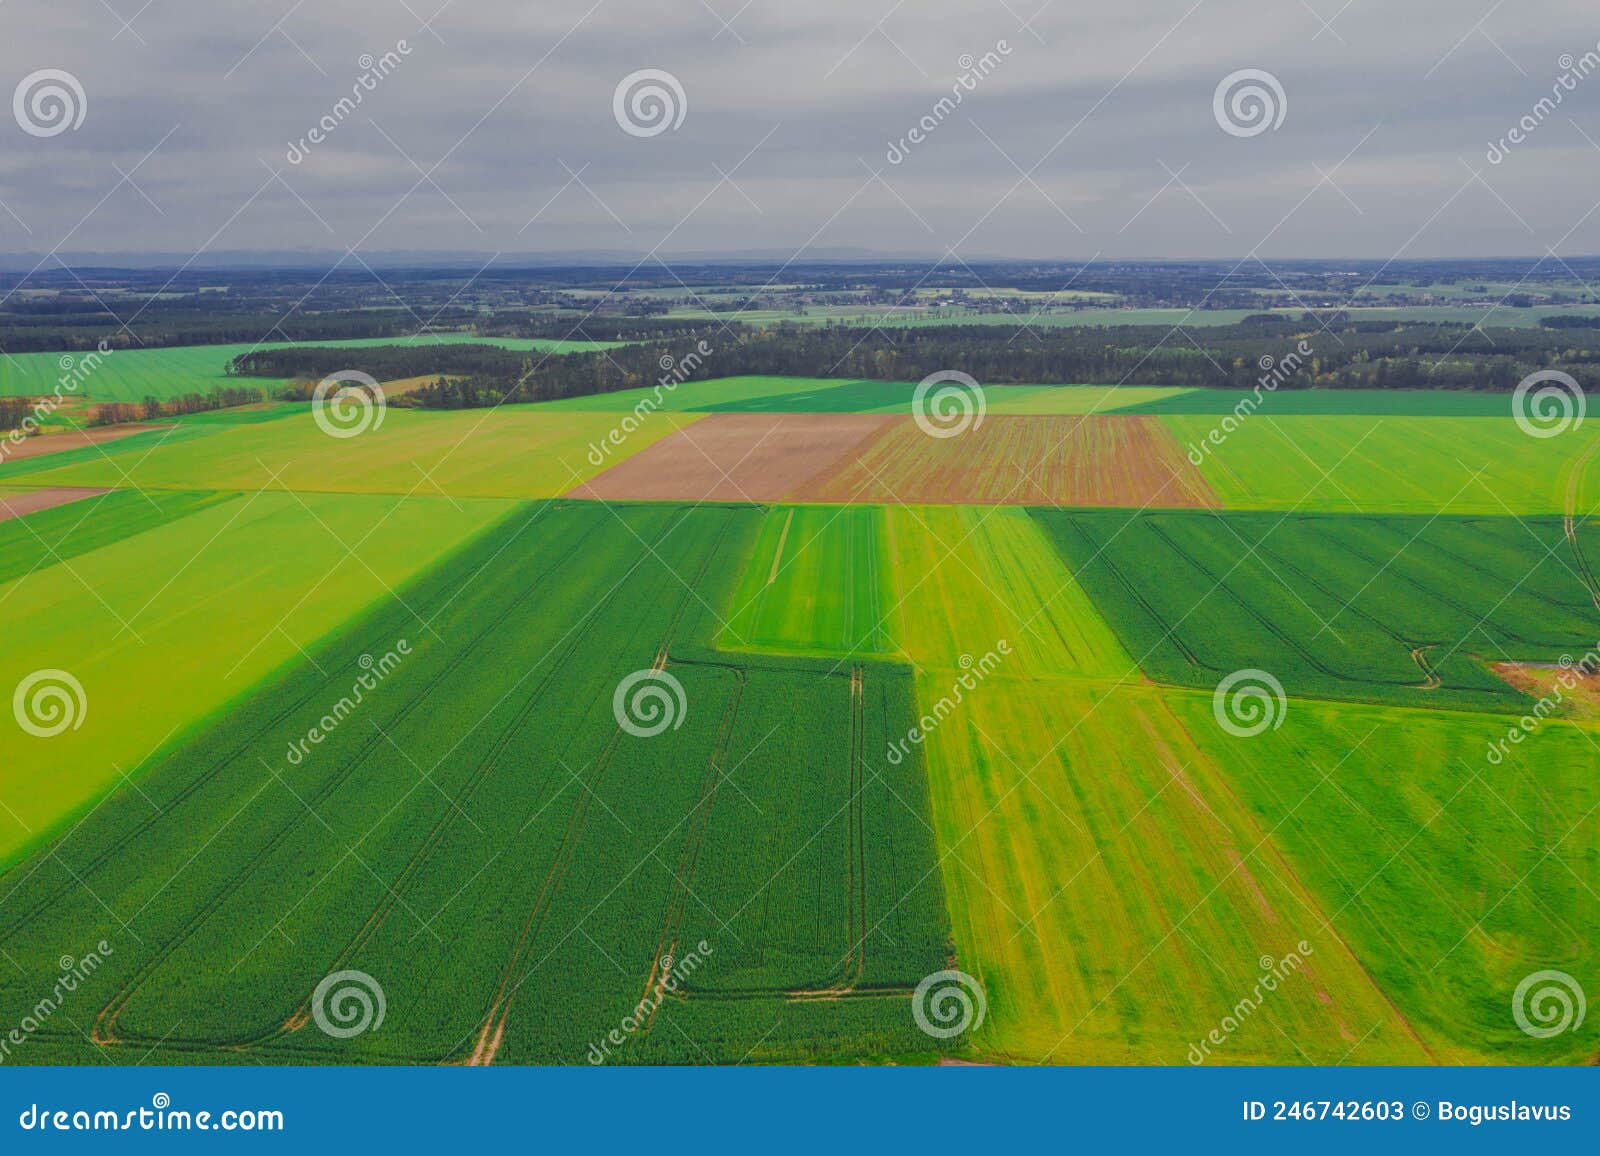 Vast Plain Seen from a Great Height. Photo from the Drone. Stock Image ...